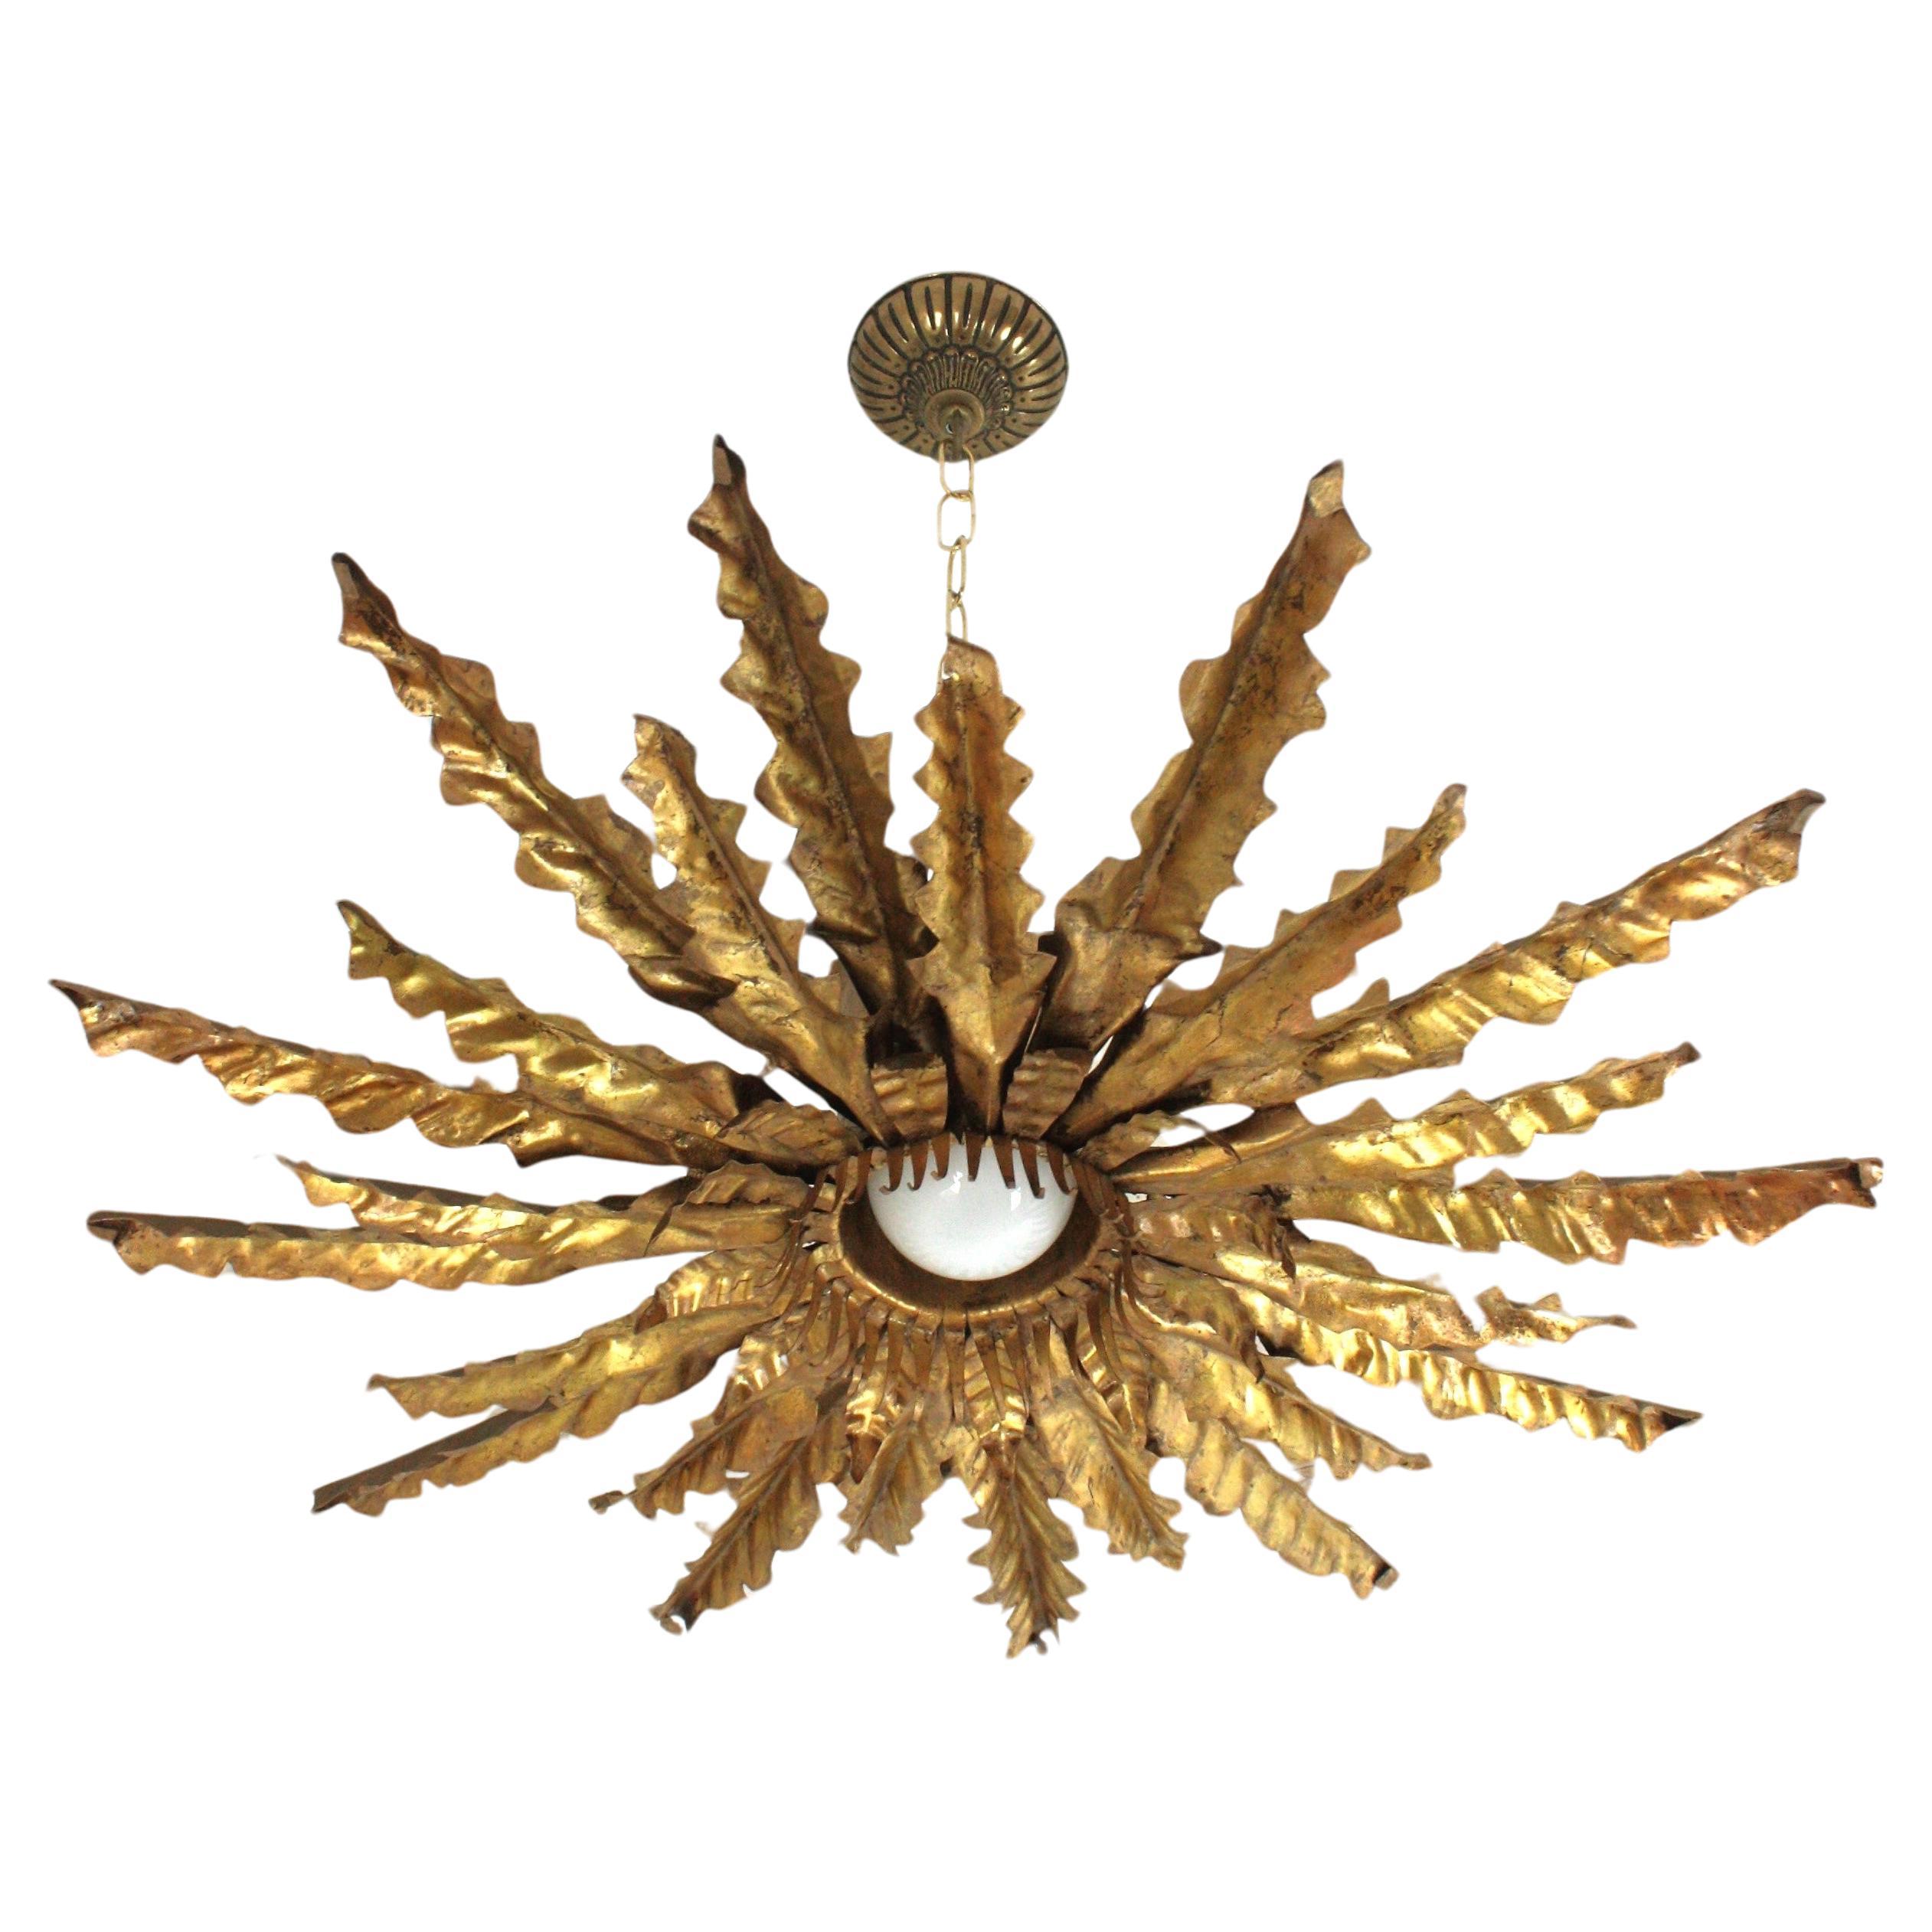 Monumental brutalist sunburst foliage gilt metal ceiling light fixture. Spain, 1950s
This handcrafted Brutalist ceiling lamp features a triple layered leafed sunburst light fixture.The handcut and hand-hammered iron leaves have a detailed work and